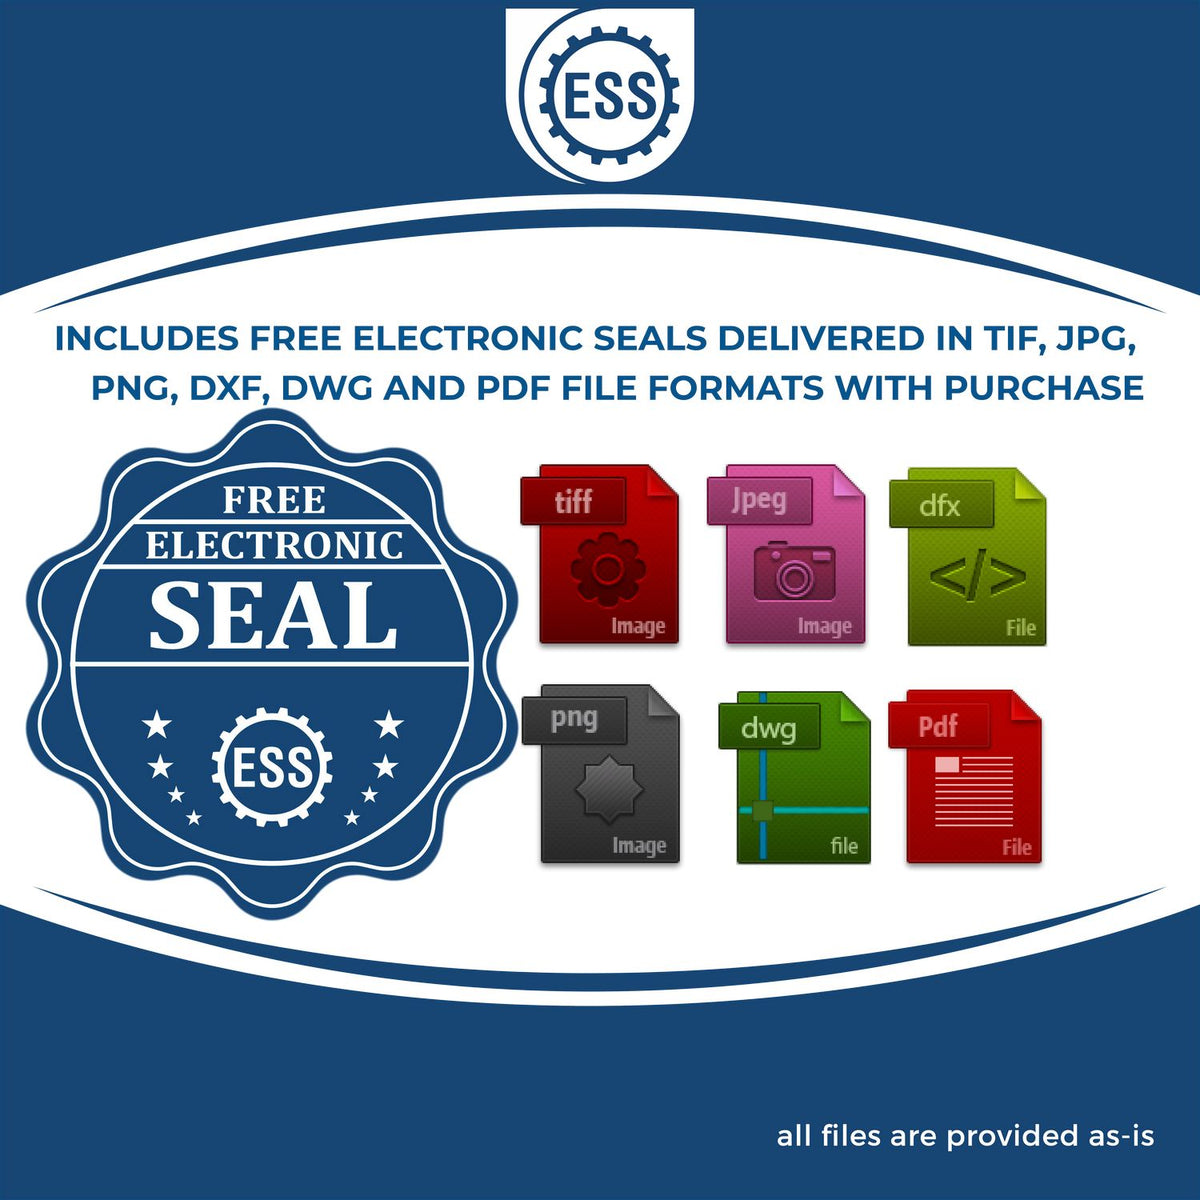 An infographic for the free electronic seal for the Soft Georgia Professional Engineer Seal illustrating the different file type icons such as DXF, DWG, TIF, JPG and PNG.